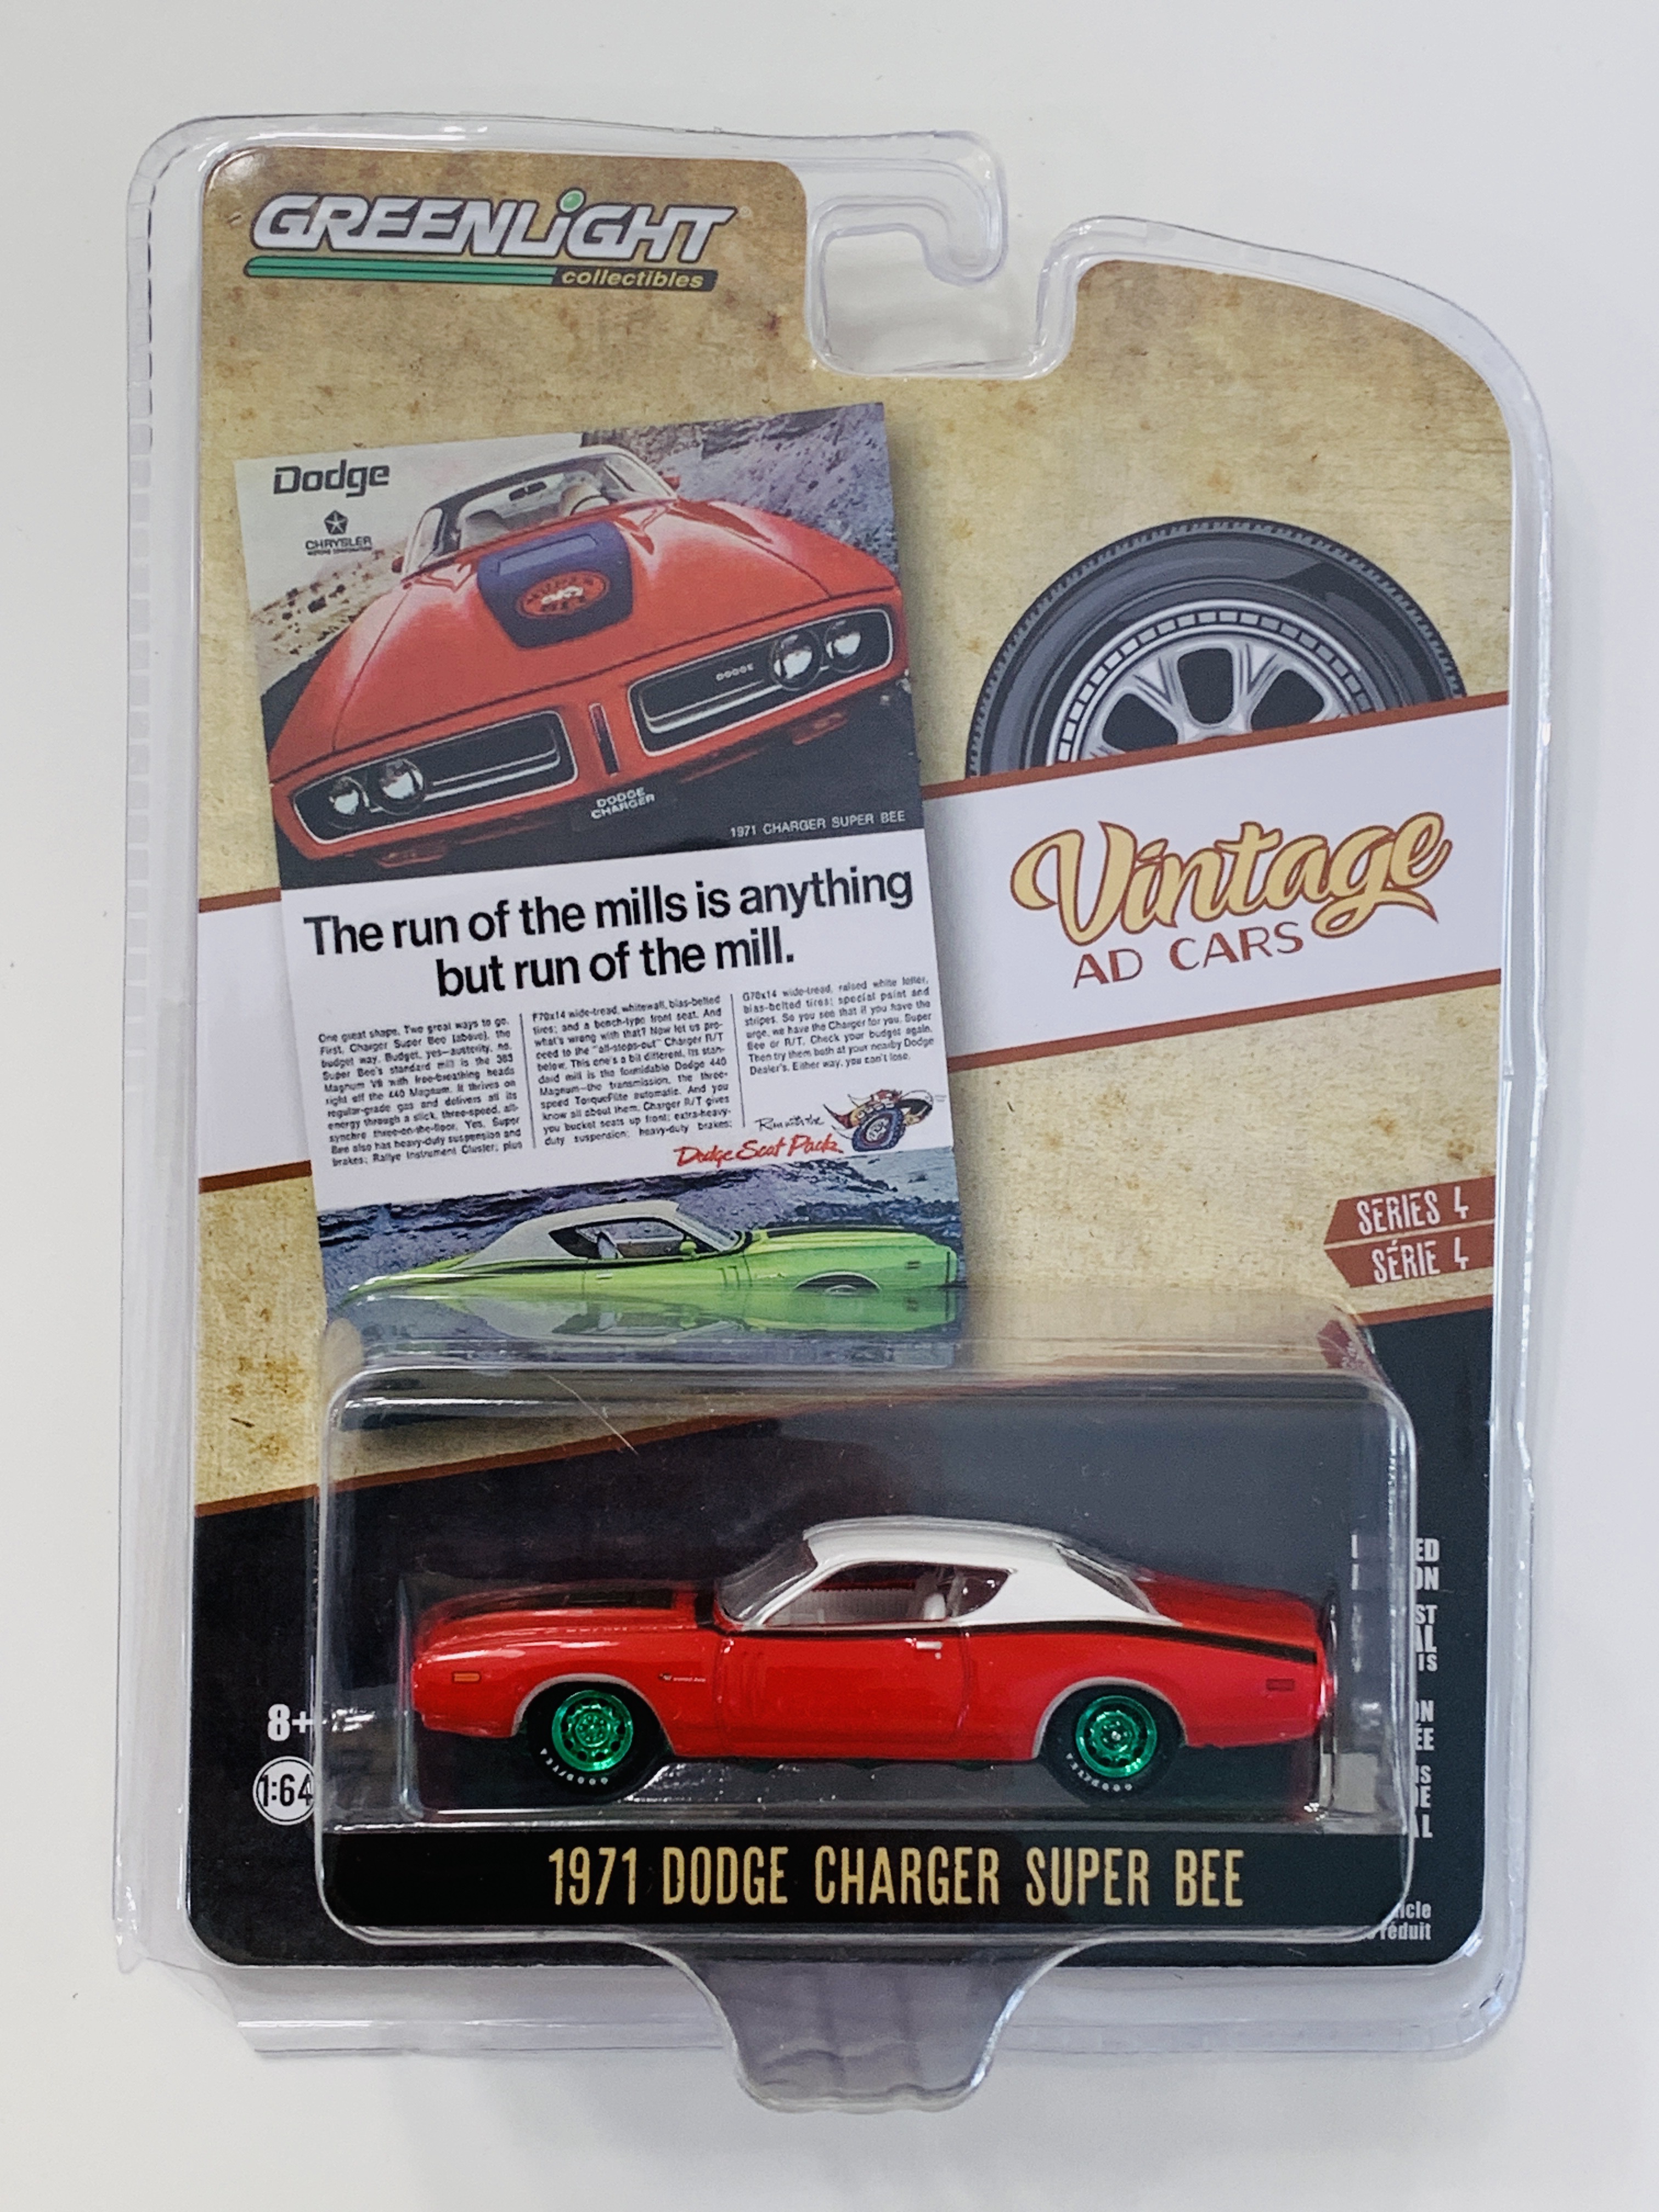 Greenlight Vintage Ad Cars 1971 Dodge Charger Super Bee Green Machine